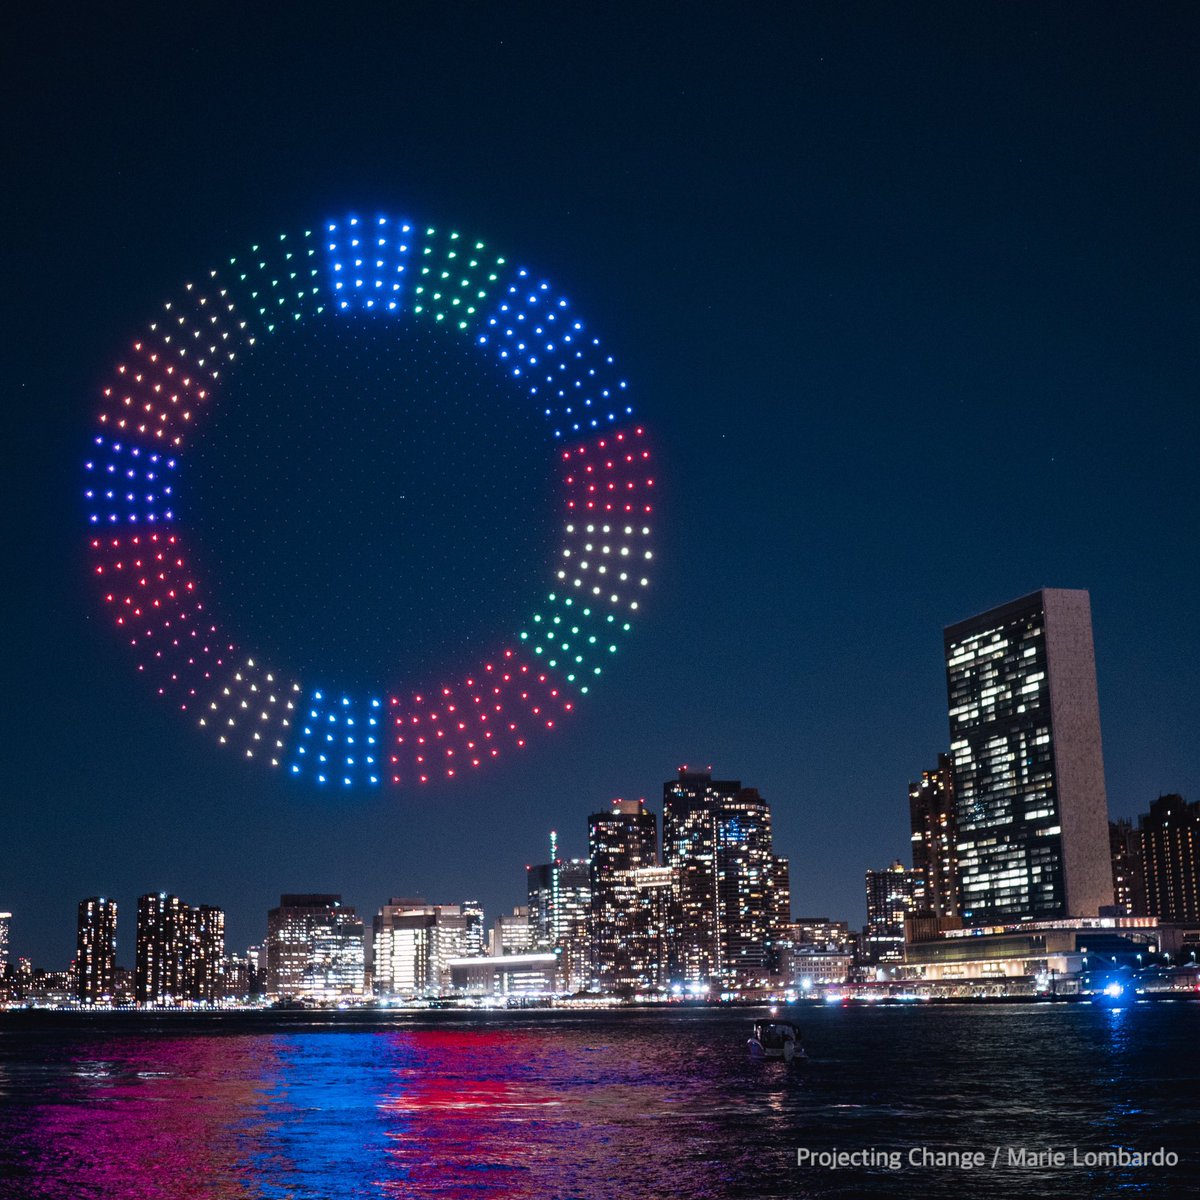 Ahead of Monday’s SDG Summit, the night sky over UNHQ in New York lights up with the #GlobalGoals in an artistic call for everyone to #ActNow for a fairer, more inclusive & sustainable future. un.org/actnow